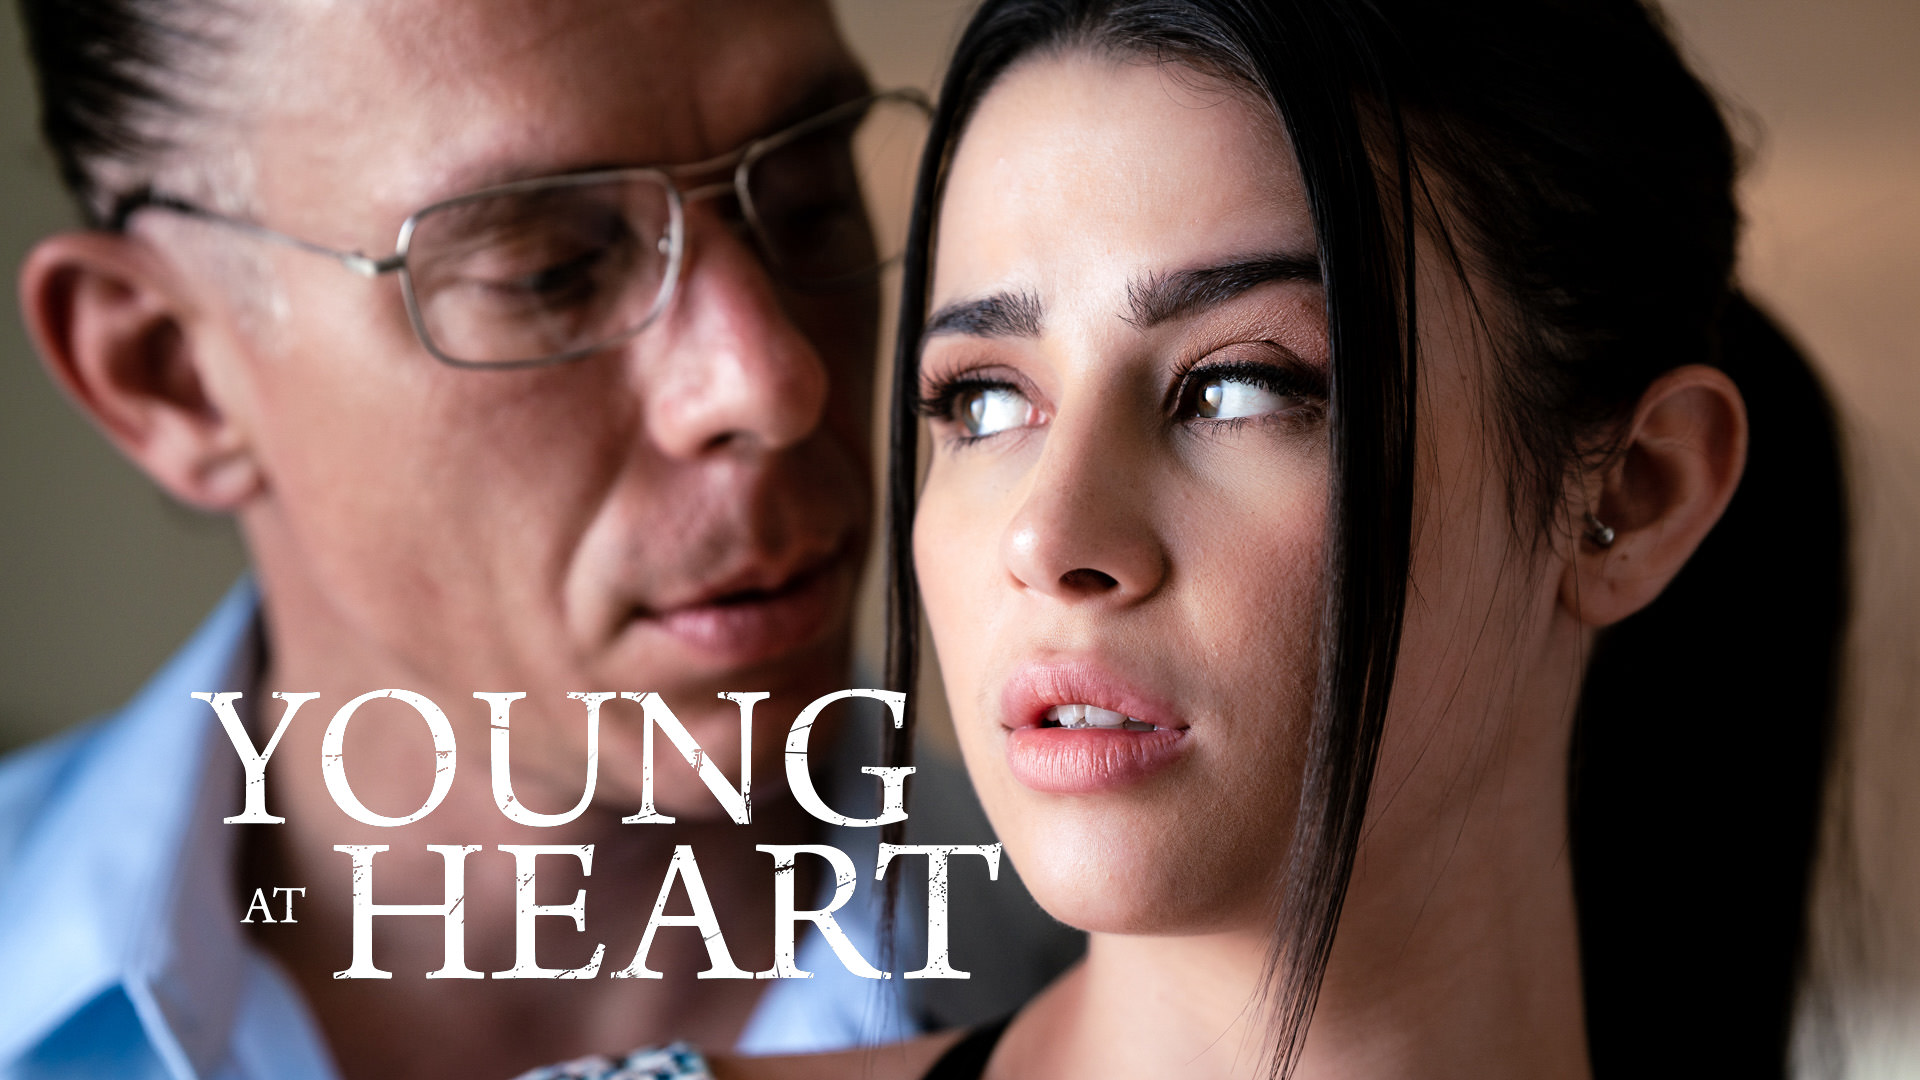 Young At Heart - Puretaboo Porn video with Mick Blue & Kylie Rocket